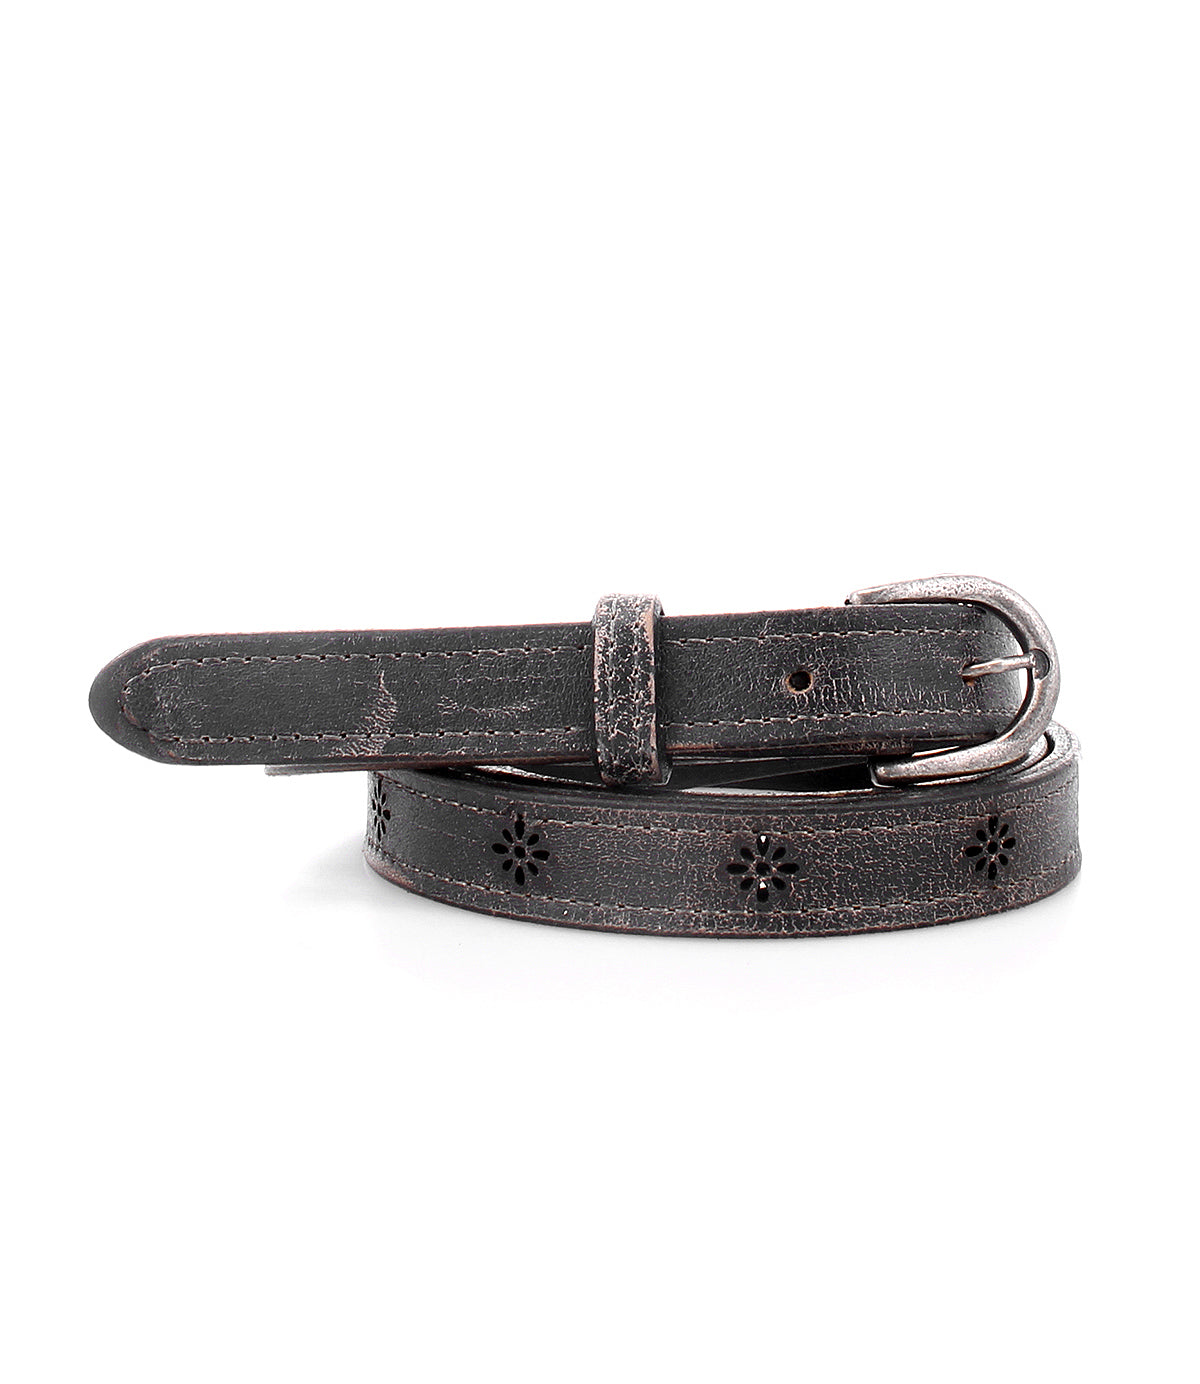 A Monae II leather belt with stars on it, by Bed Stu.